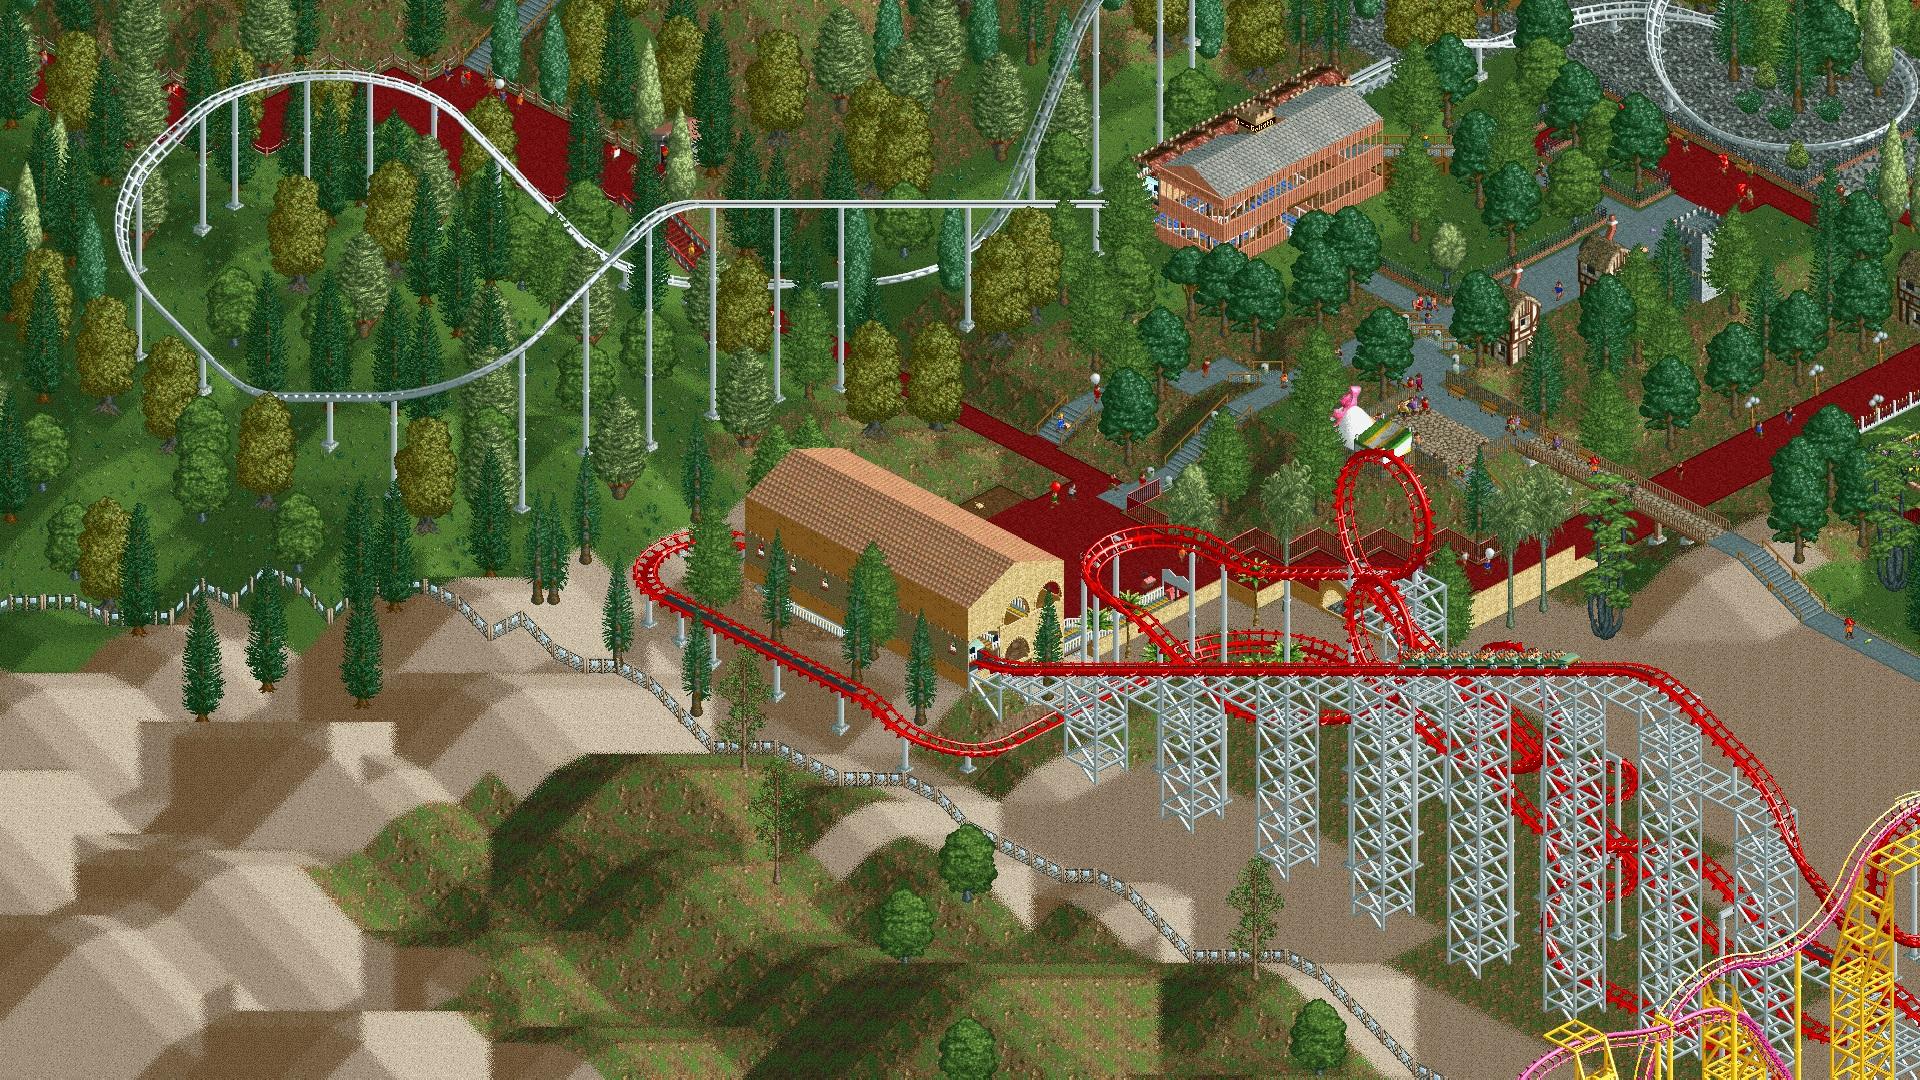 A big interview with Chris Sawyer, the creator of RollerCoaster Tycoon